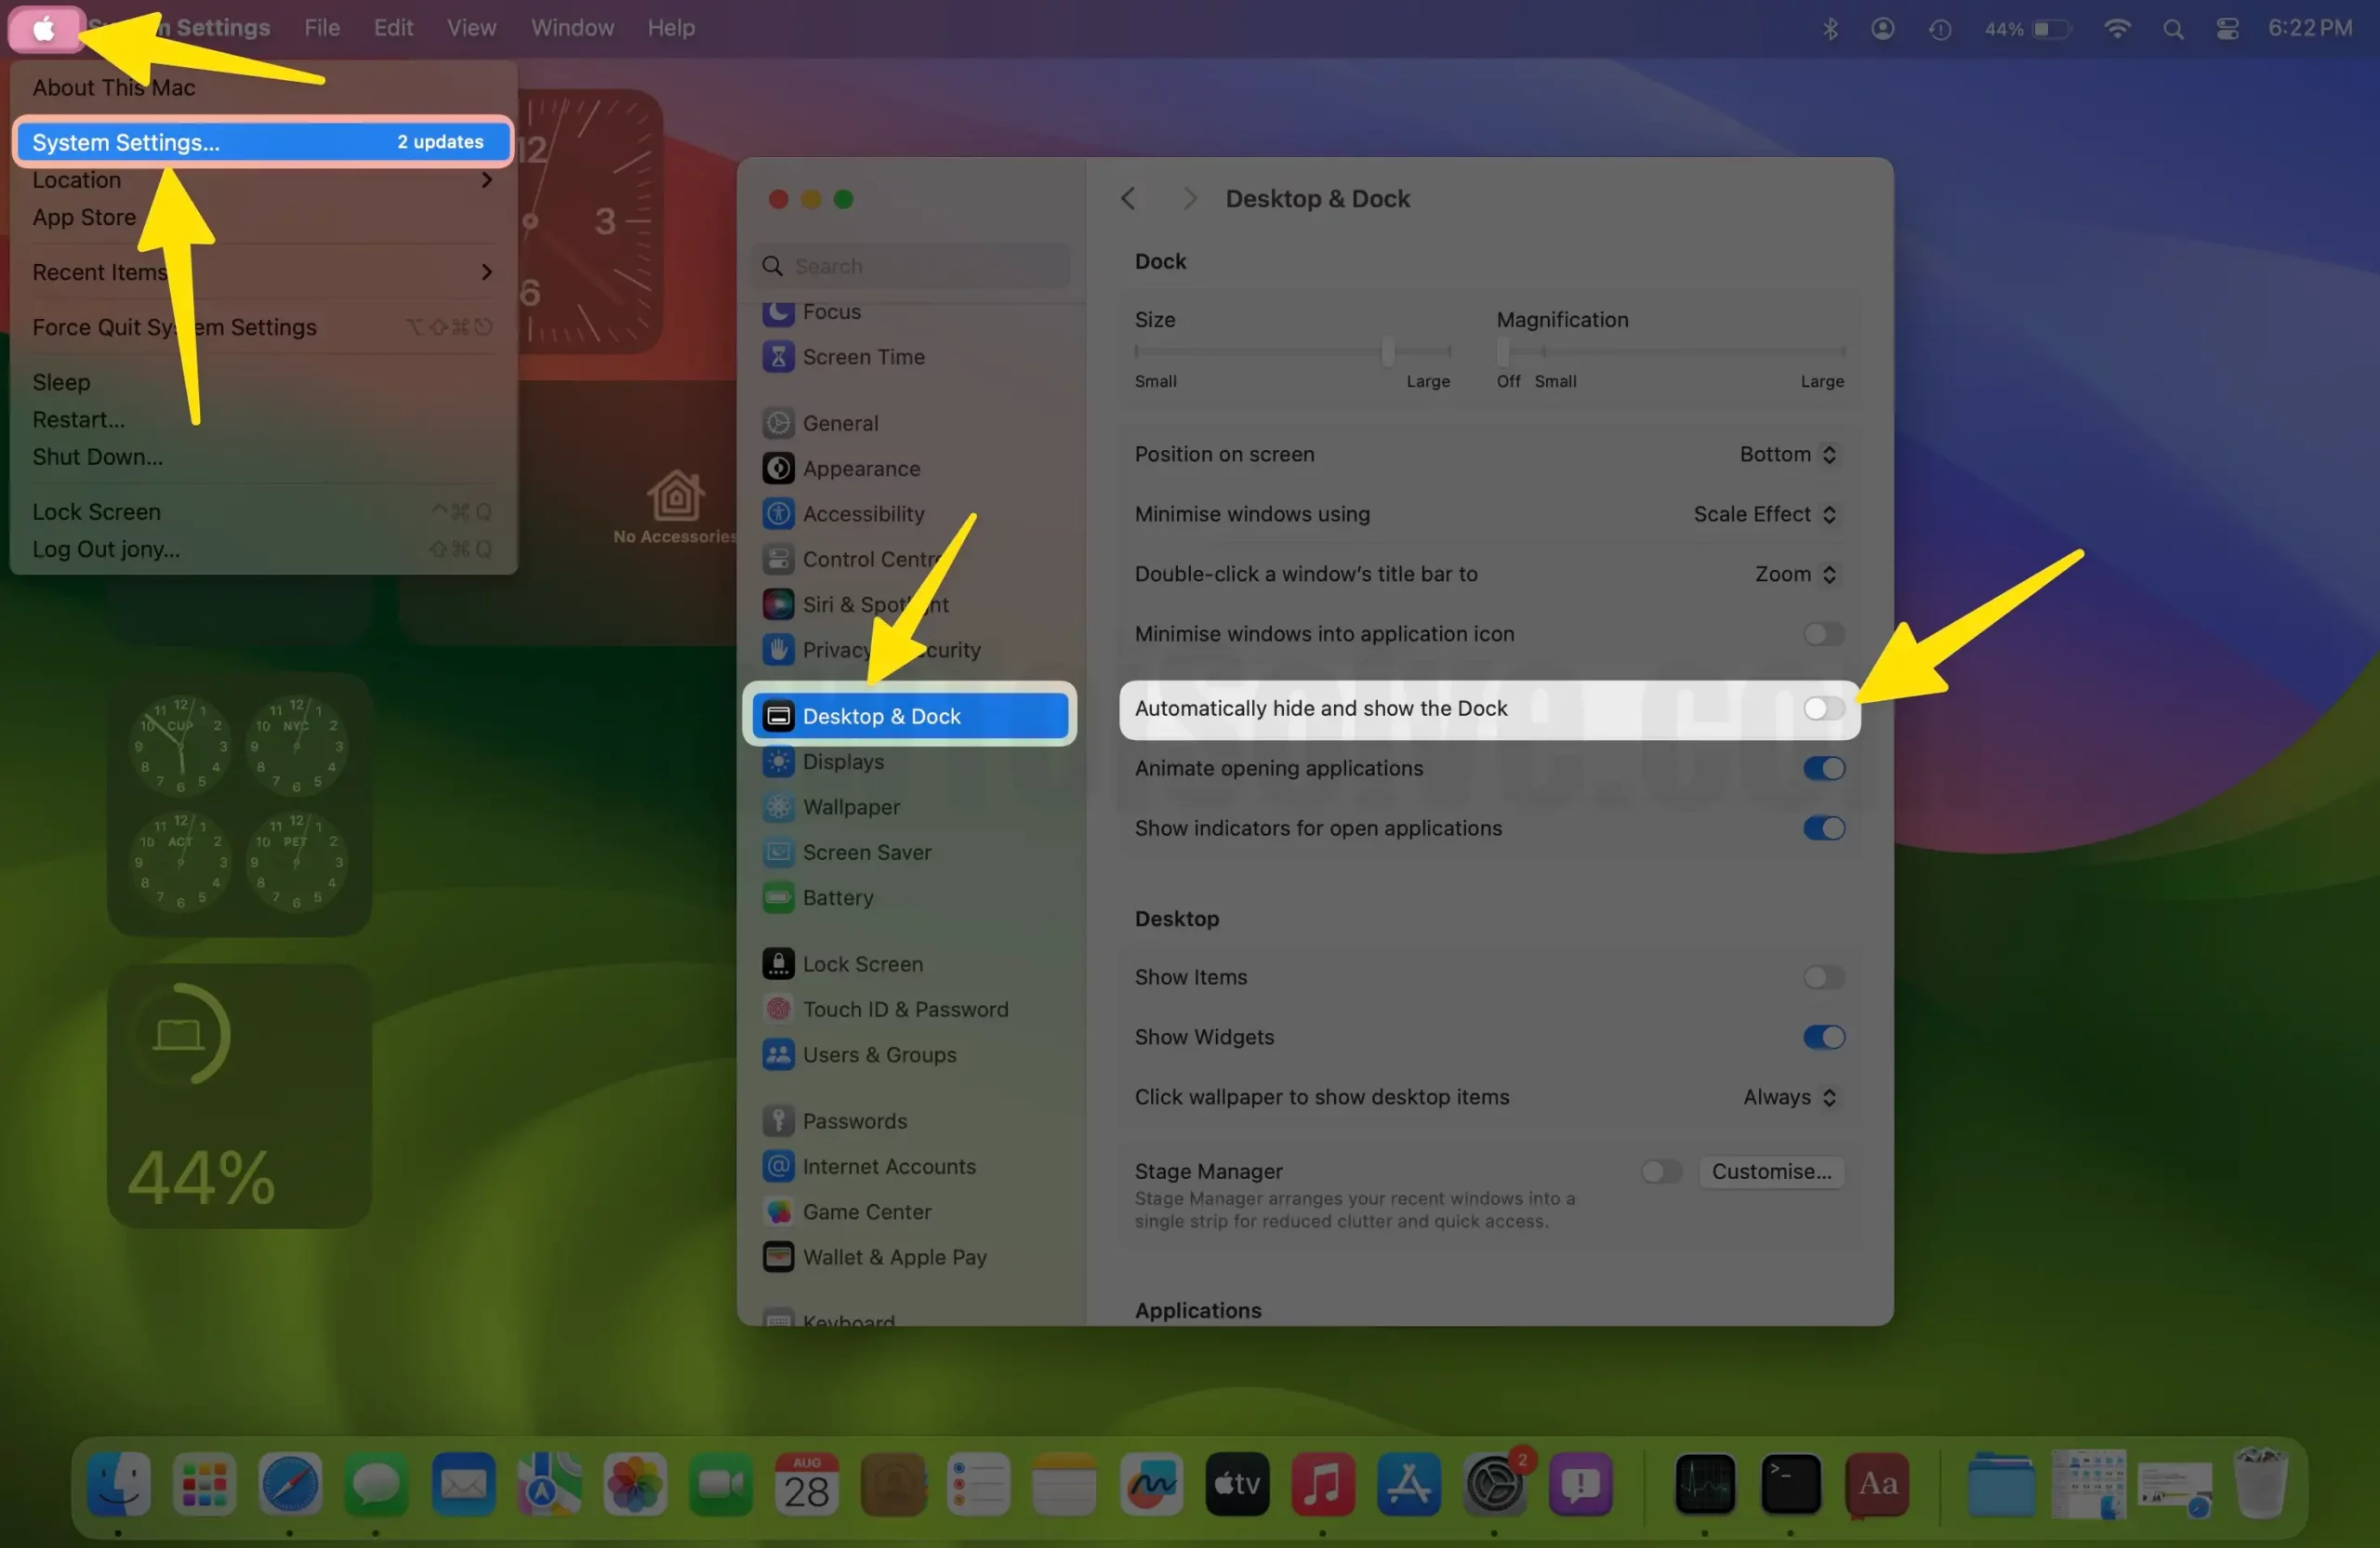 Automatically hide and show the Dock to Fix Slow Boot on Mac